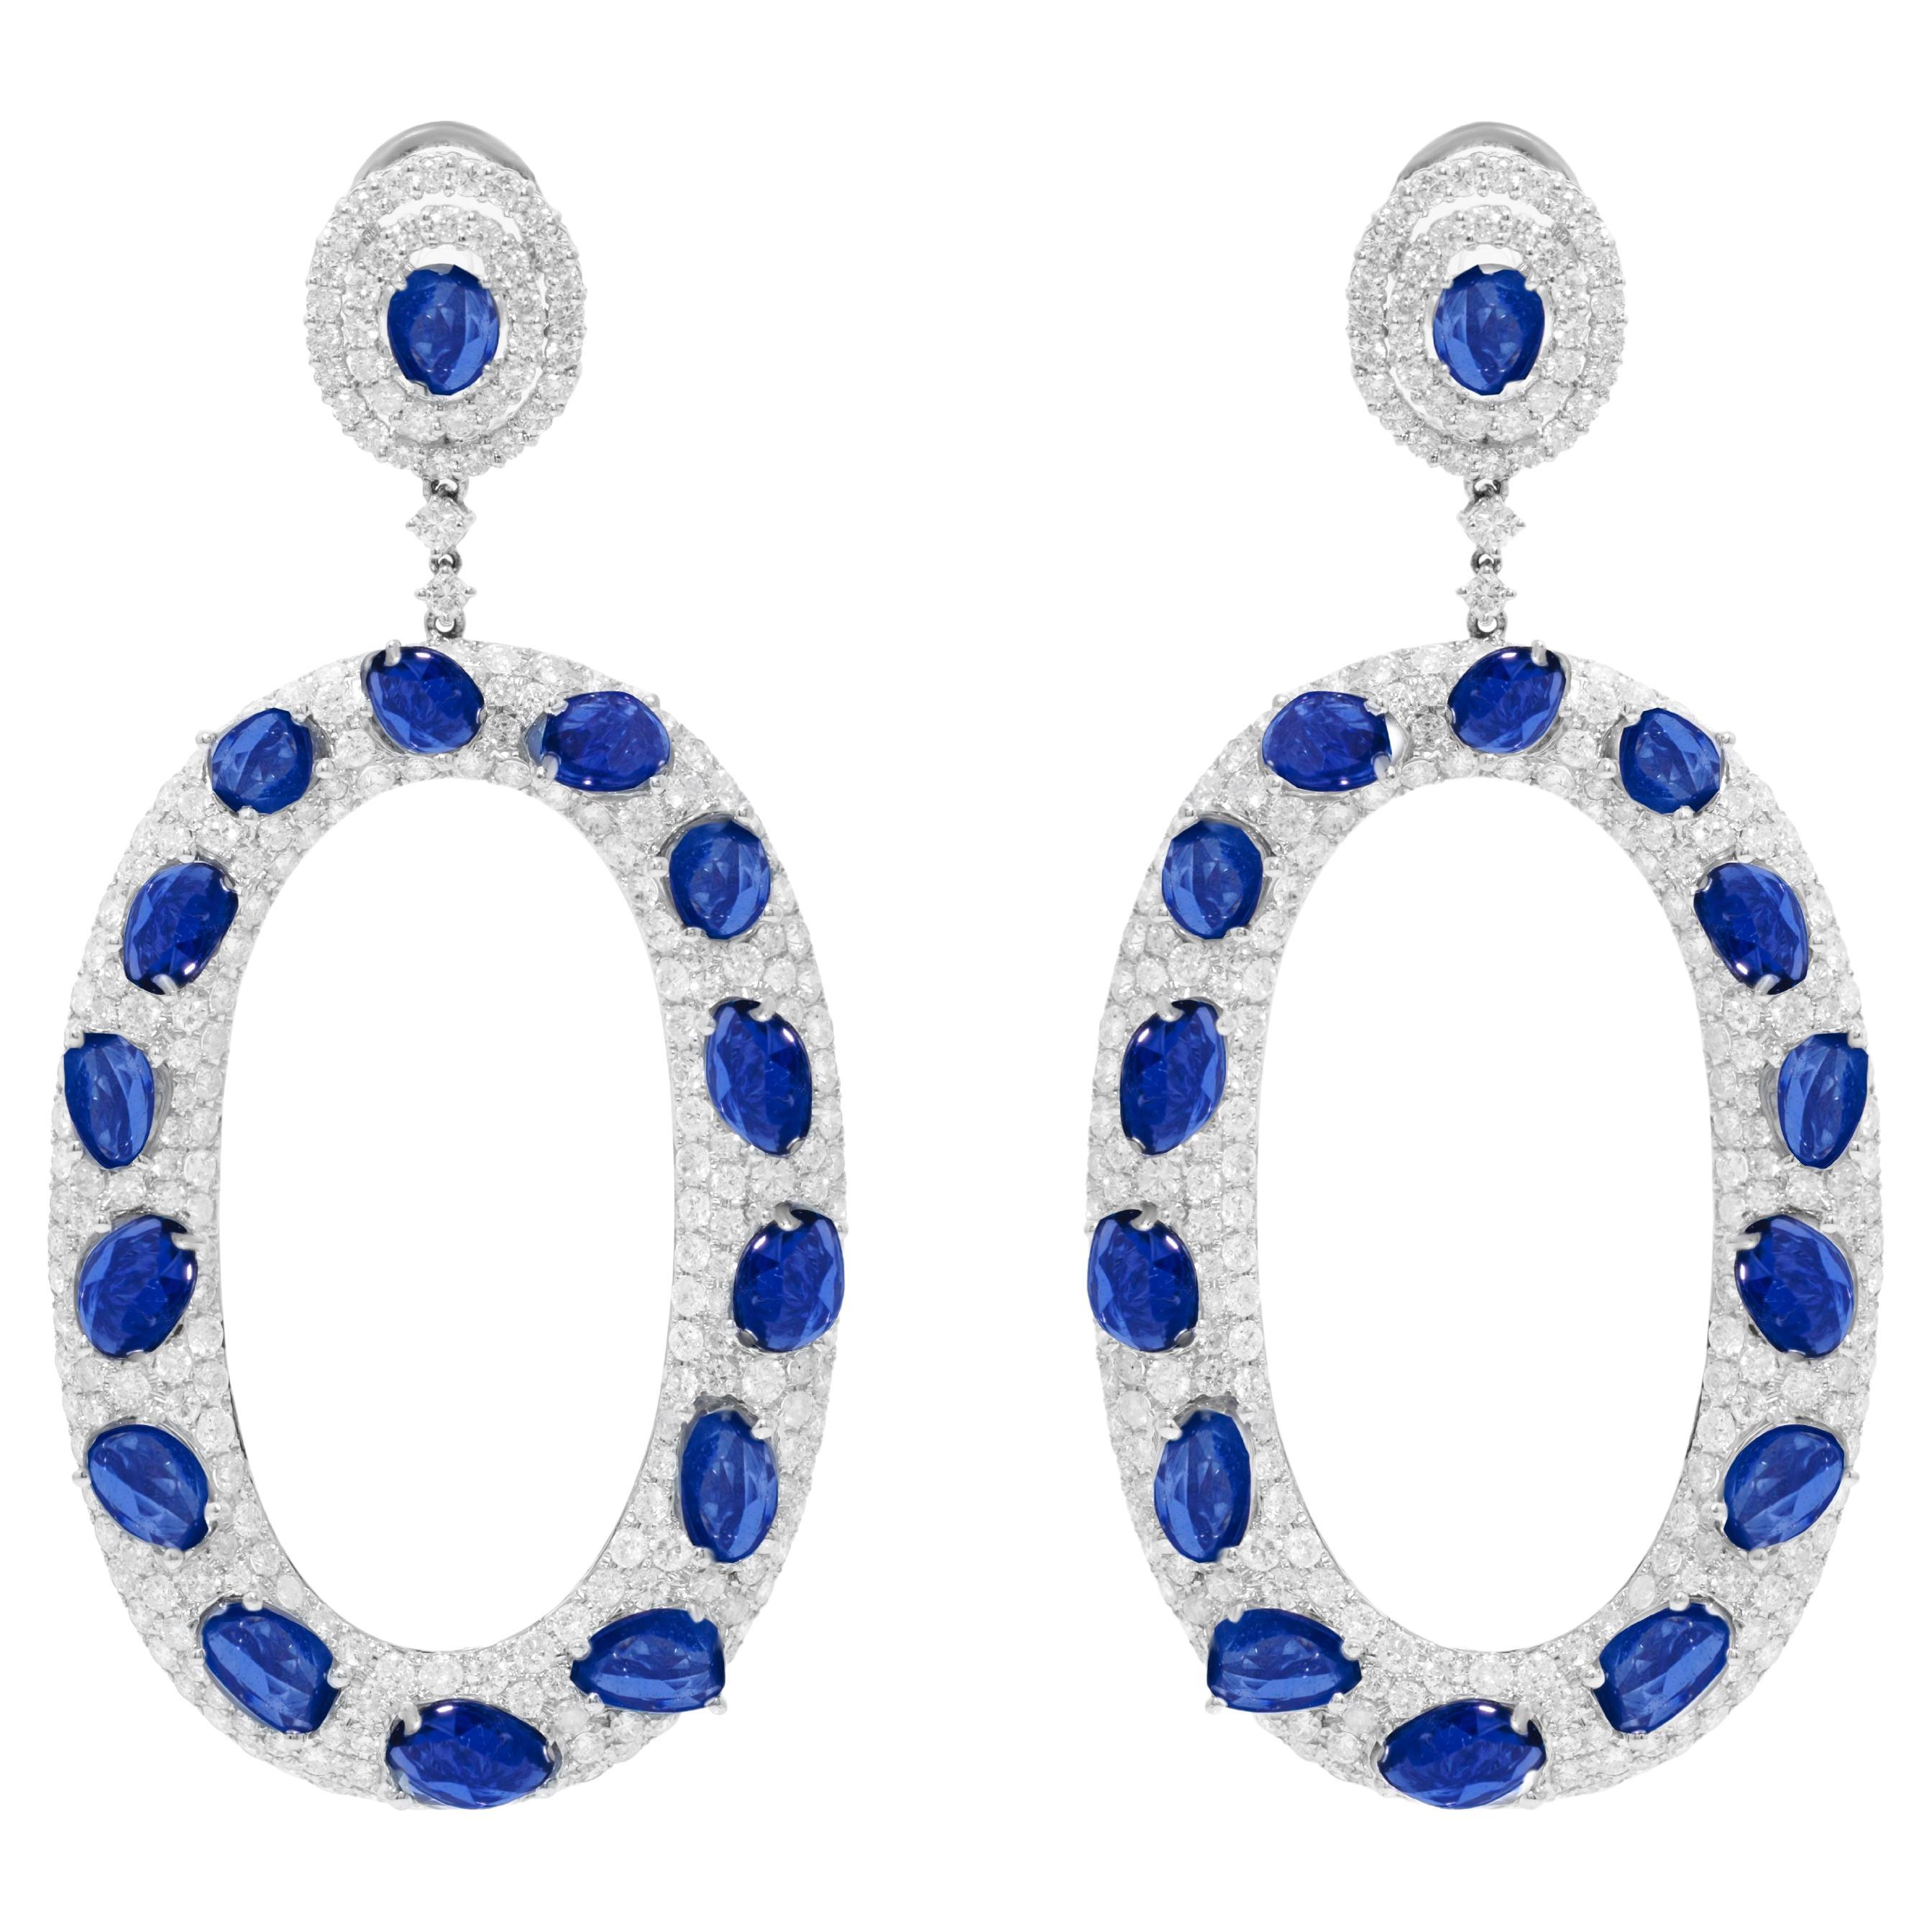 Diana M. 20.14 Carat Sapphire and Diamond Bagel Fashion Earrings  For Sale